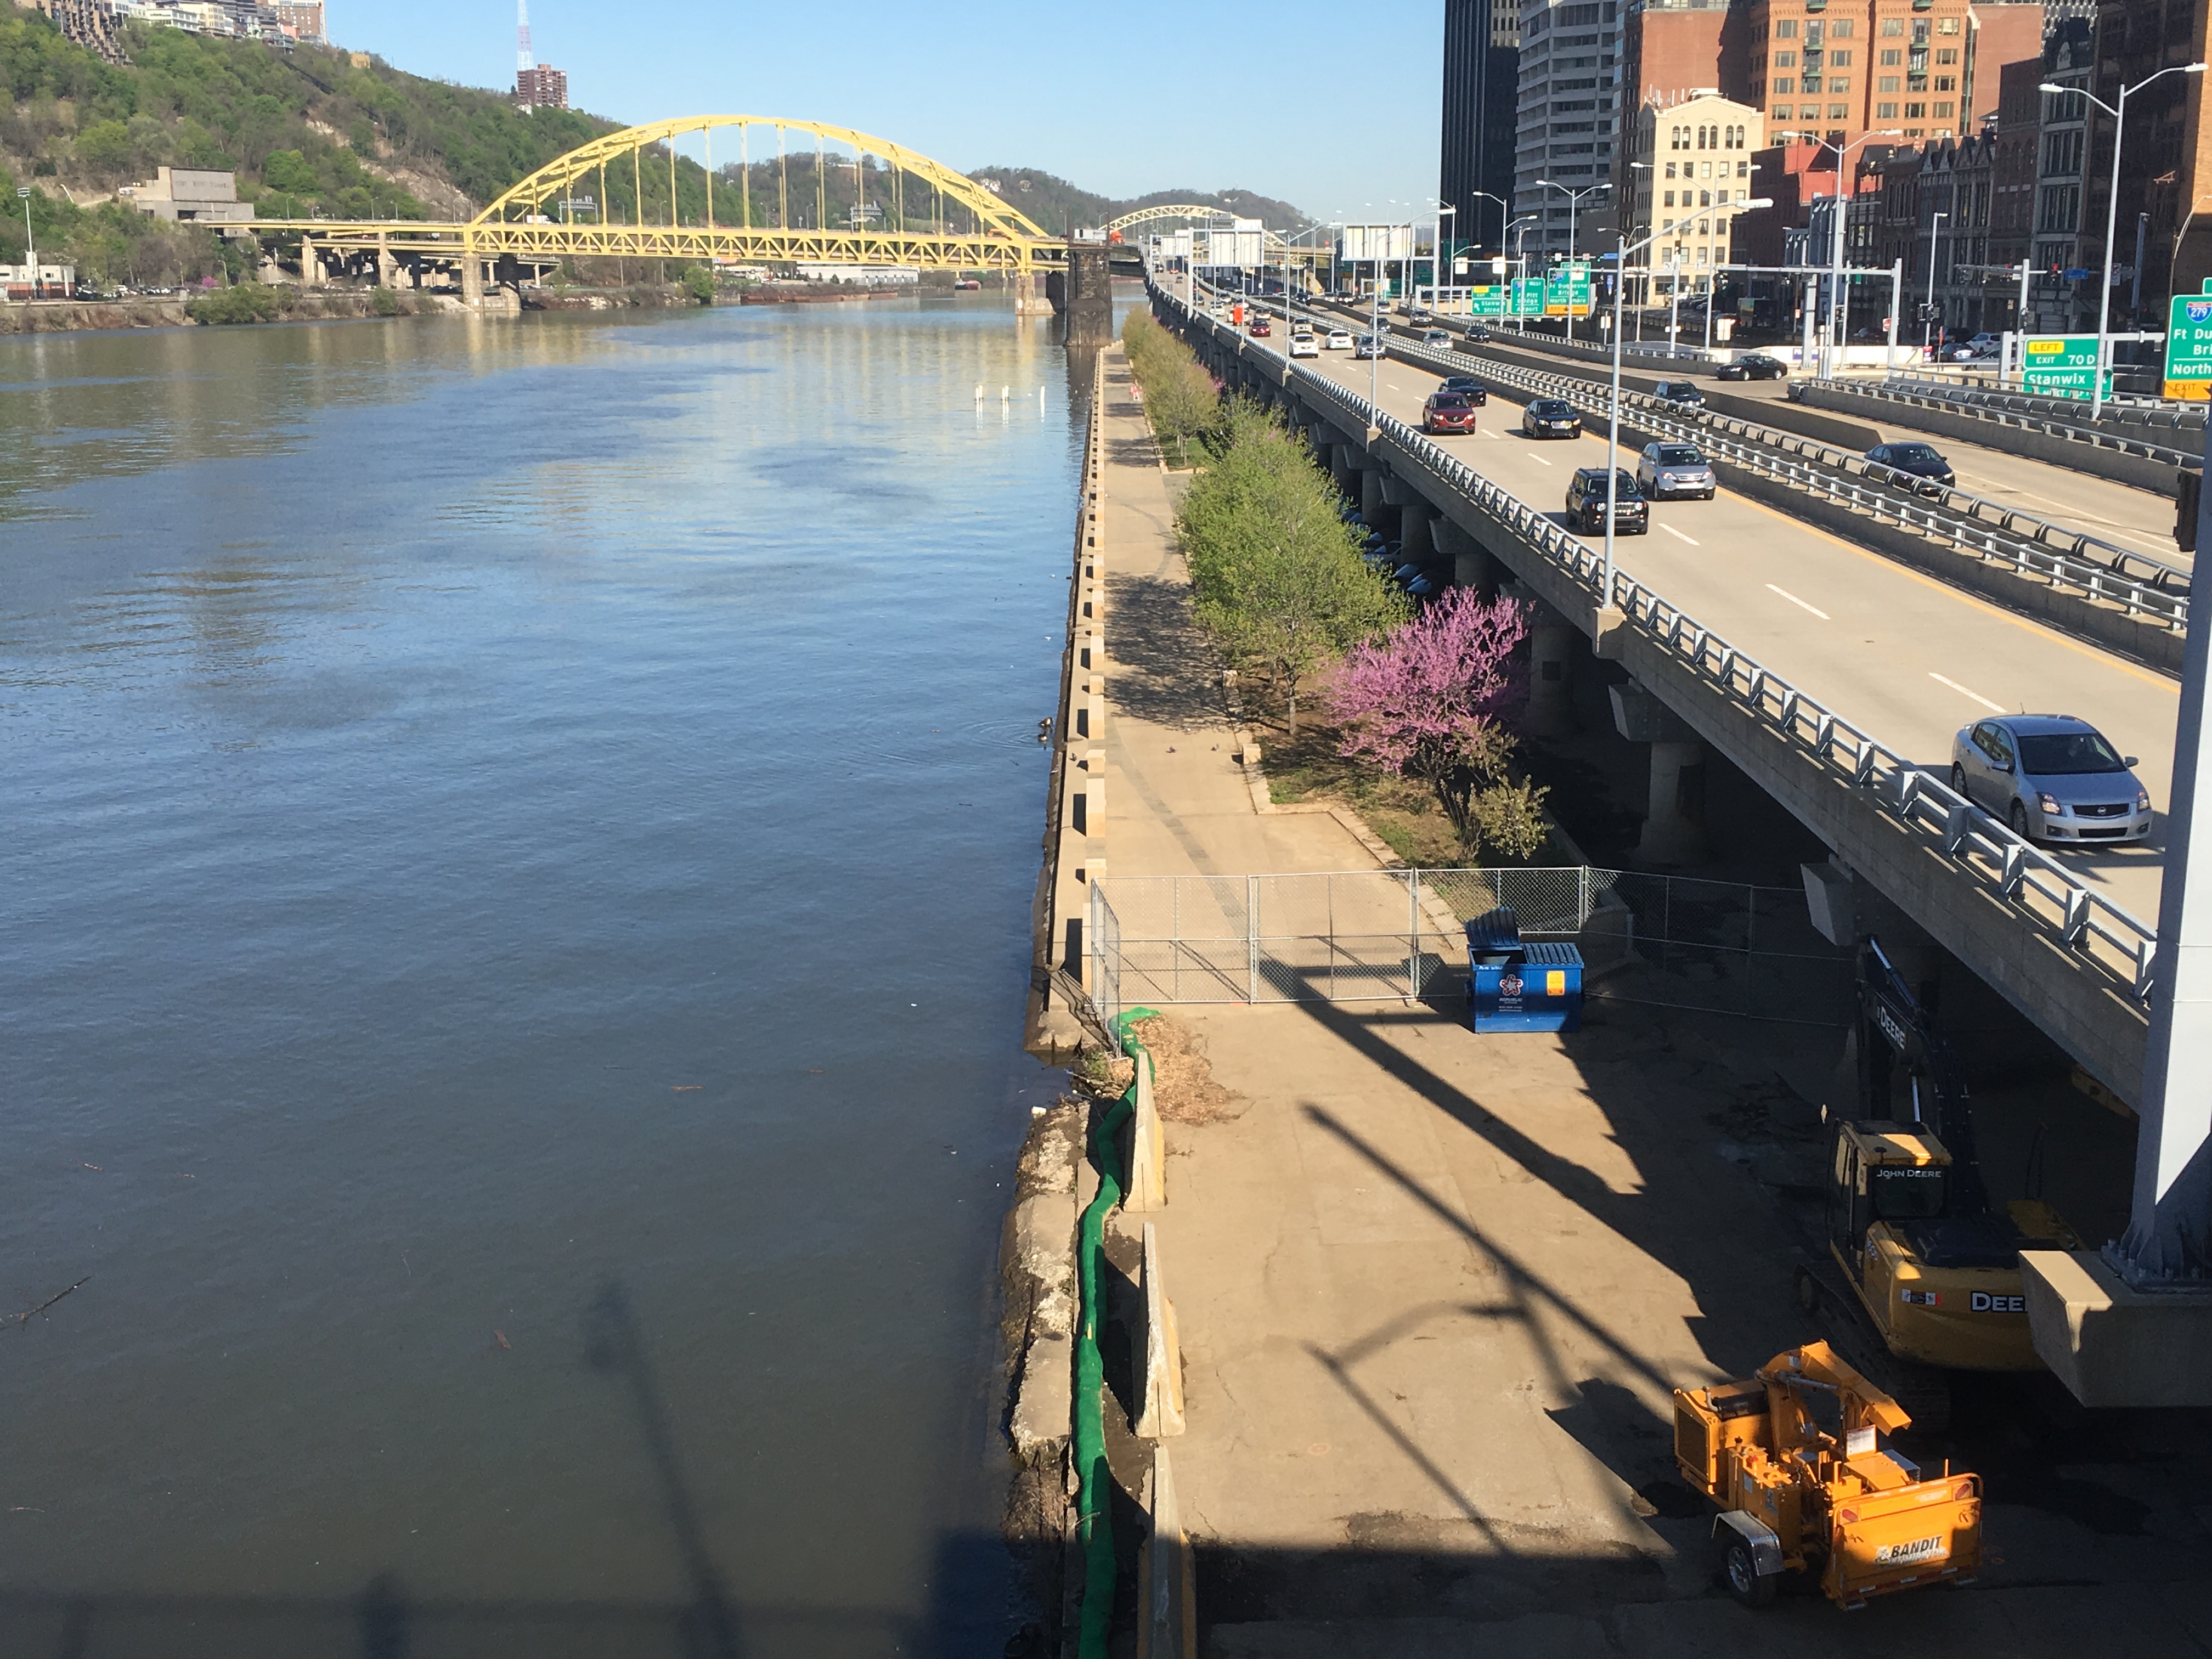 View of the Switchback construction site and Mon Wharf Landing from the Smithfield Street Bridge.